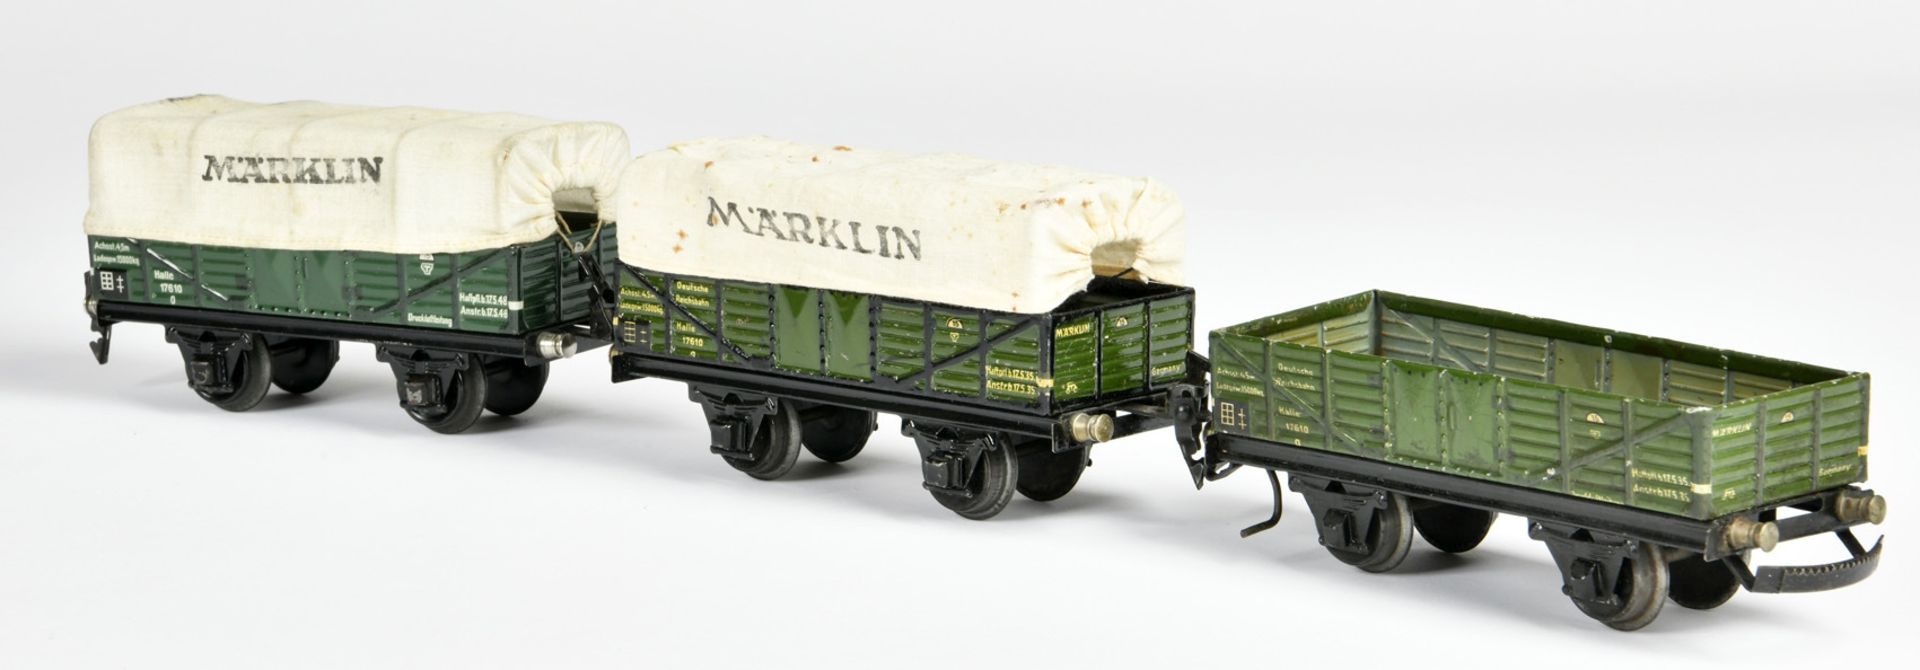 Märklin, 2 covered wagons 1710 and 1 high side freight wagon with automatic coupling, Germany pw, - Image 2 of 2